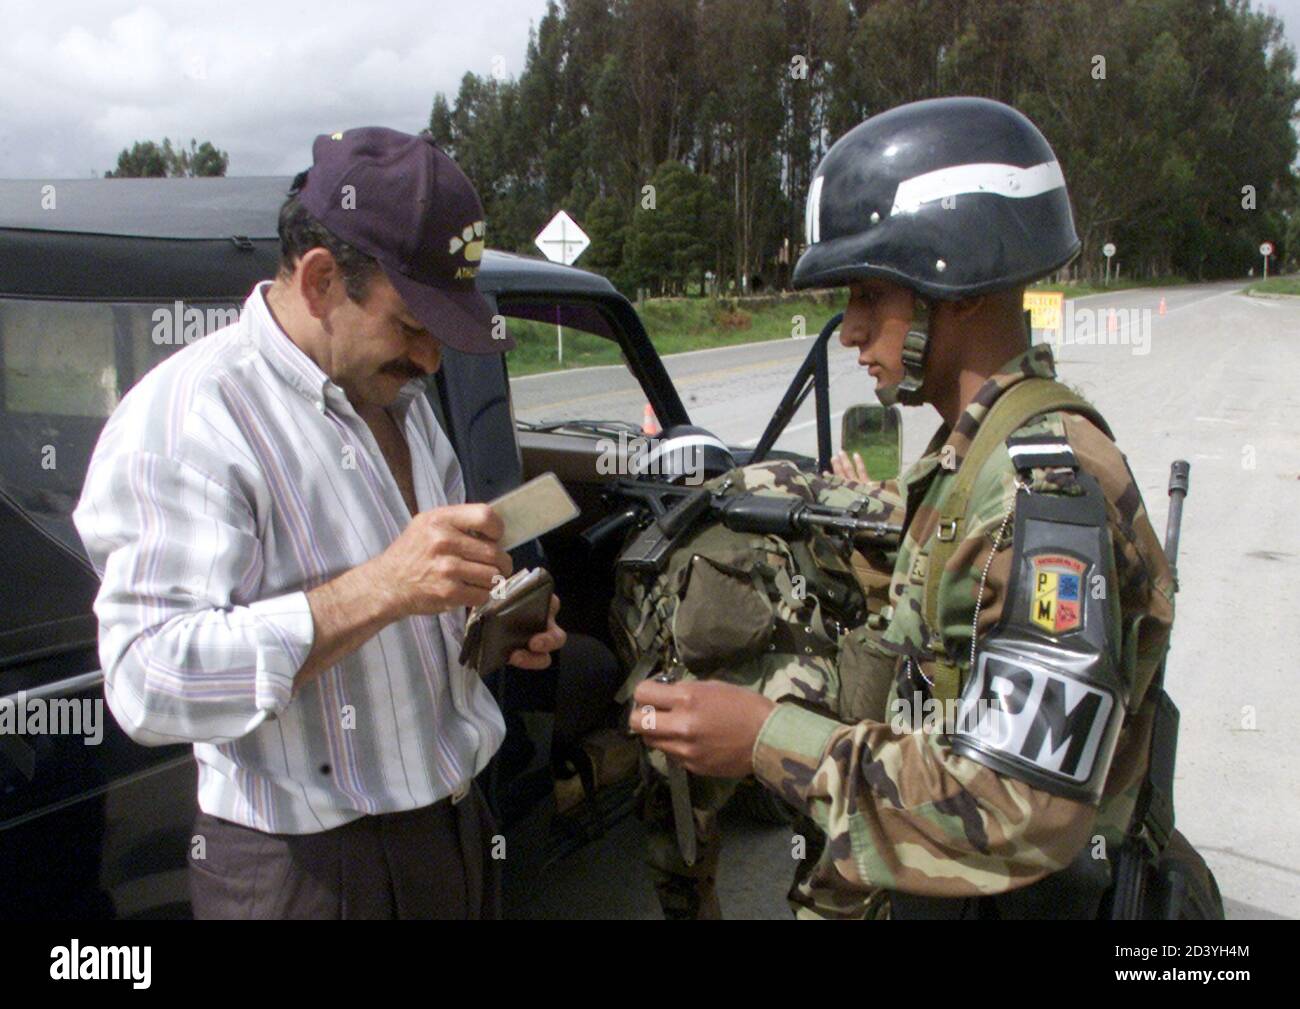 A Colomibian citizen shows his documents to a soldier in a check point in the village of Guasca, near Bogota, May 22, 2002. The Colombian presidential election will be held on May 26. REUTERS/Eliana Aponte  EA/MMR Stock Photo